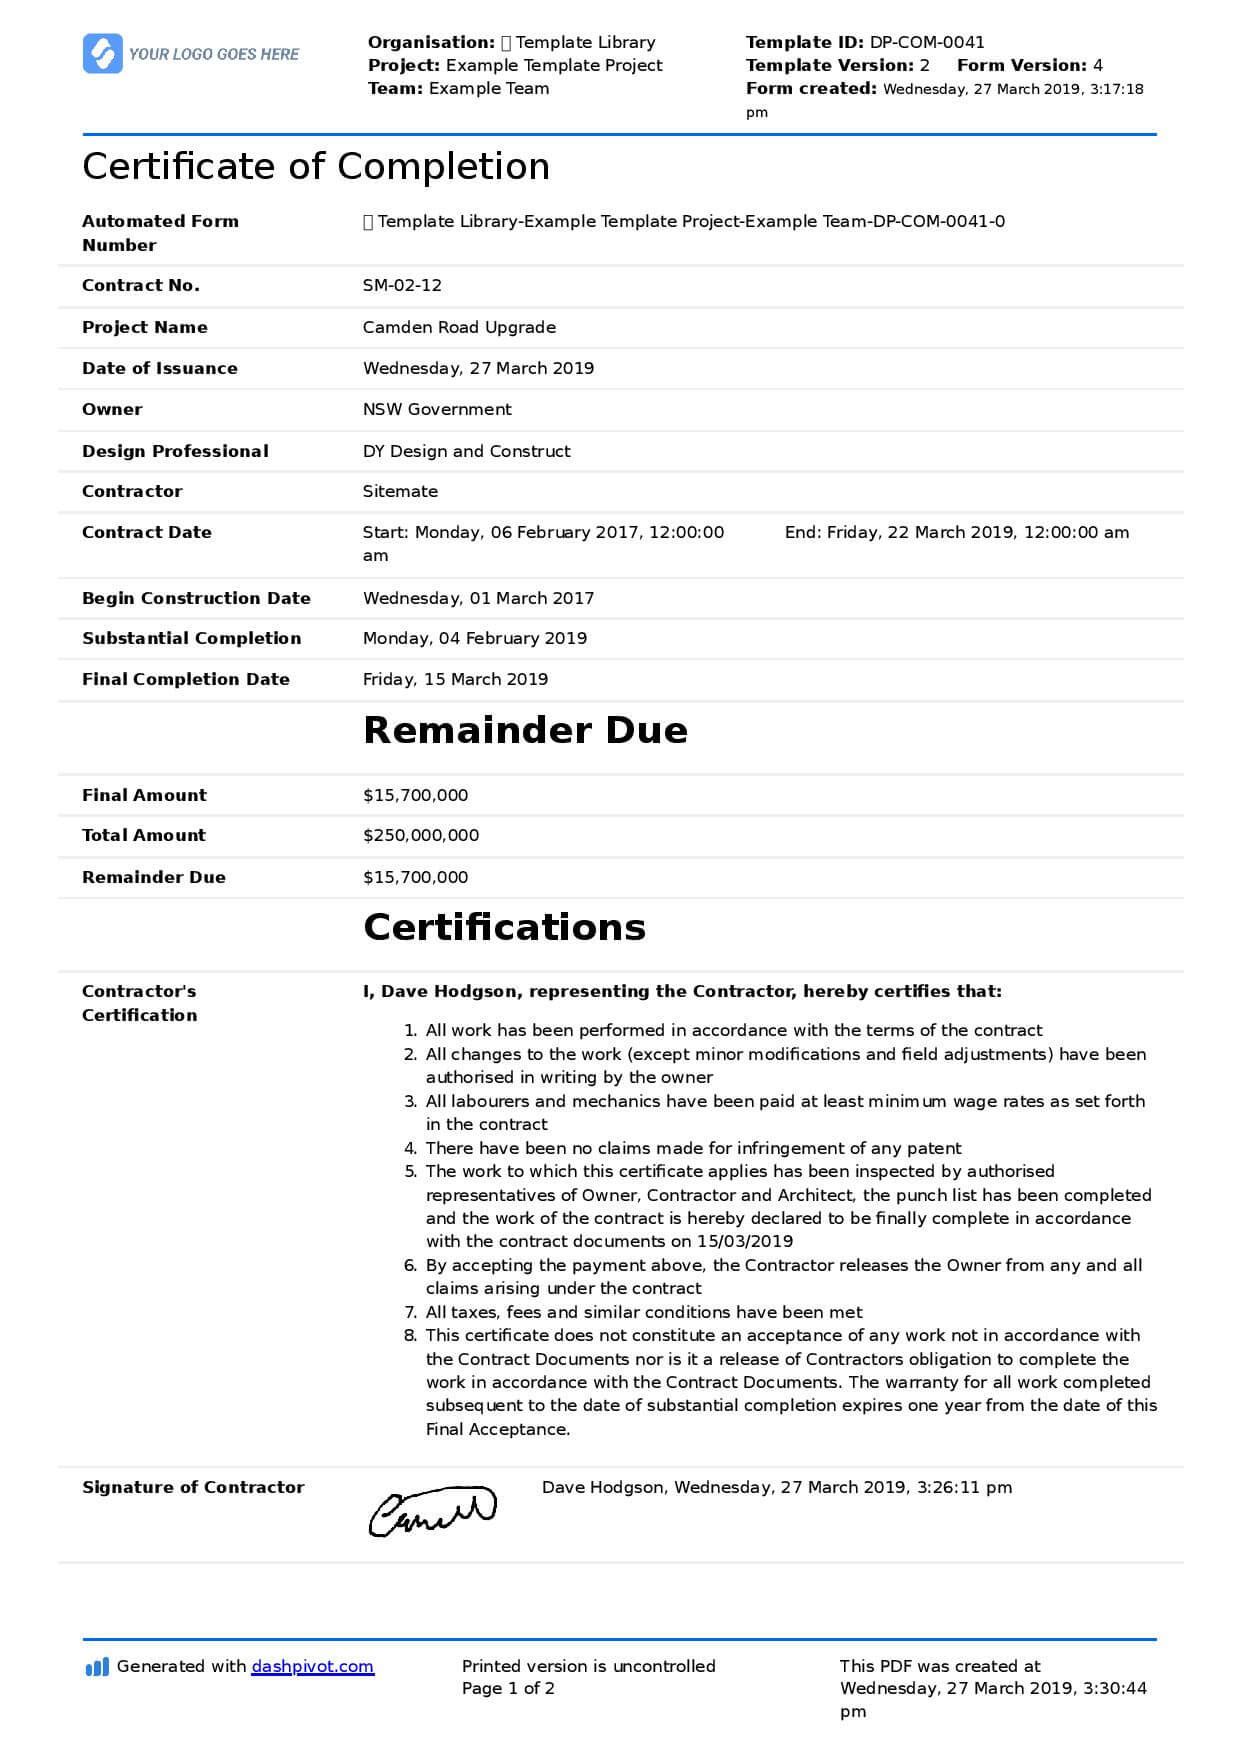 Certificate Of Completion For Construction (Free Template + Within Construction Certificate Of Completion Template